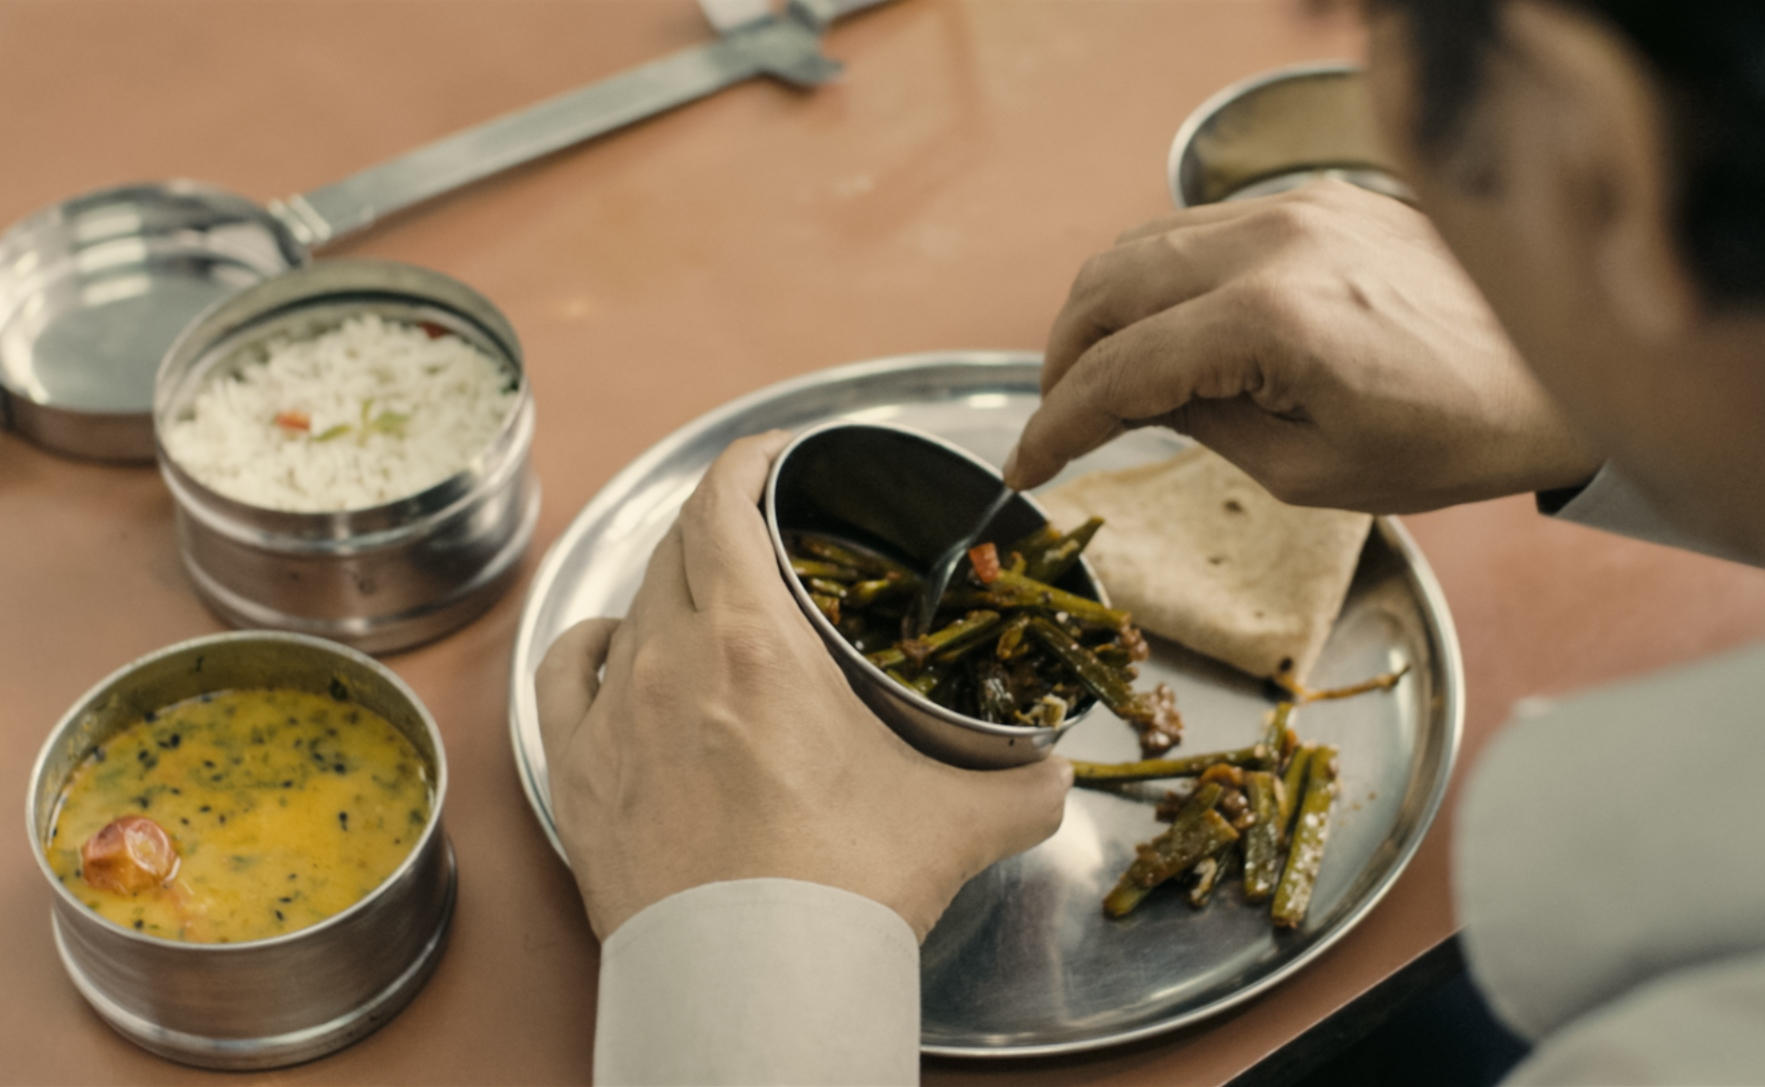 A scene from Ritesh Batra's The Lunchbox。